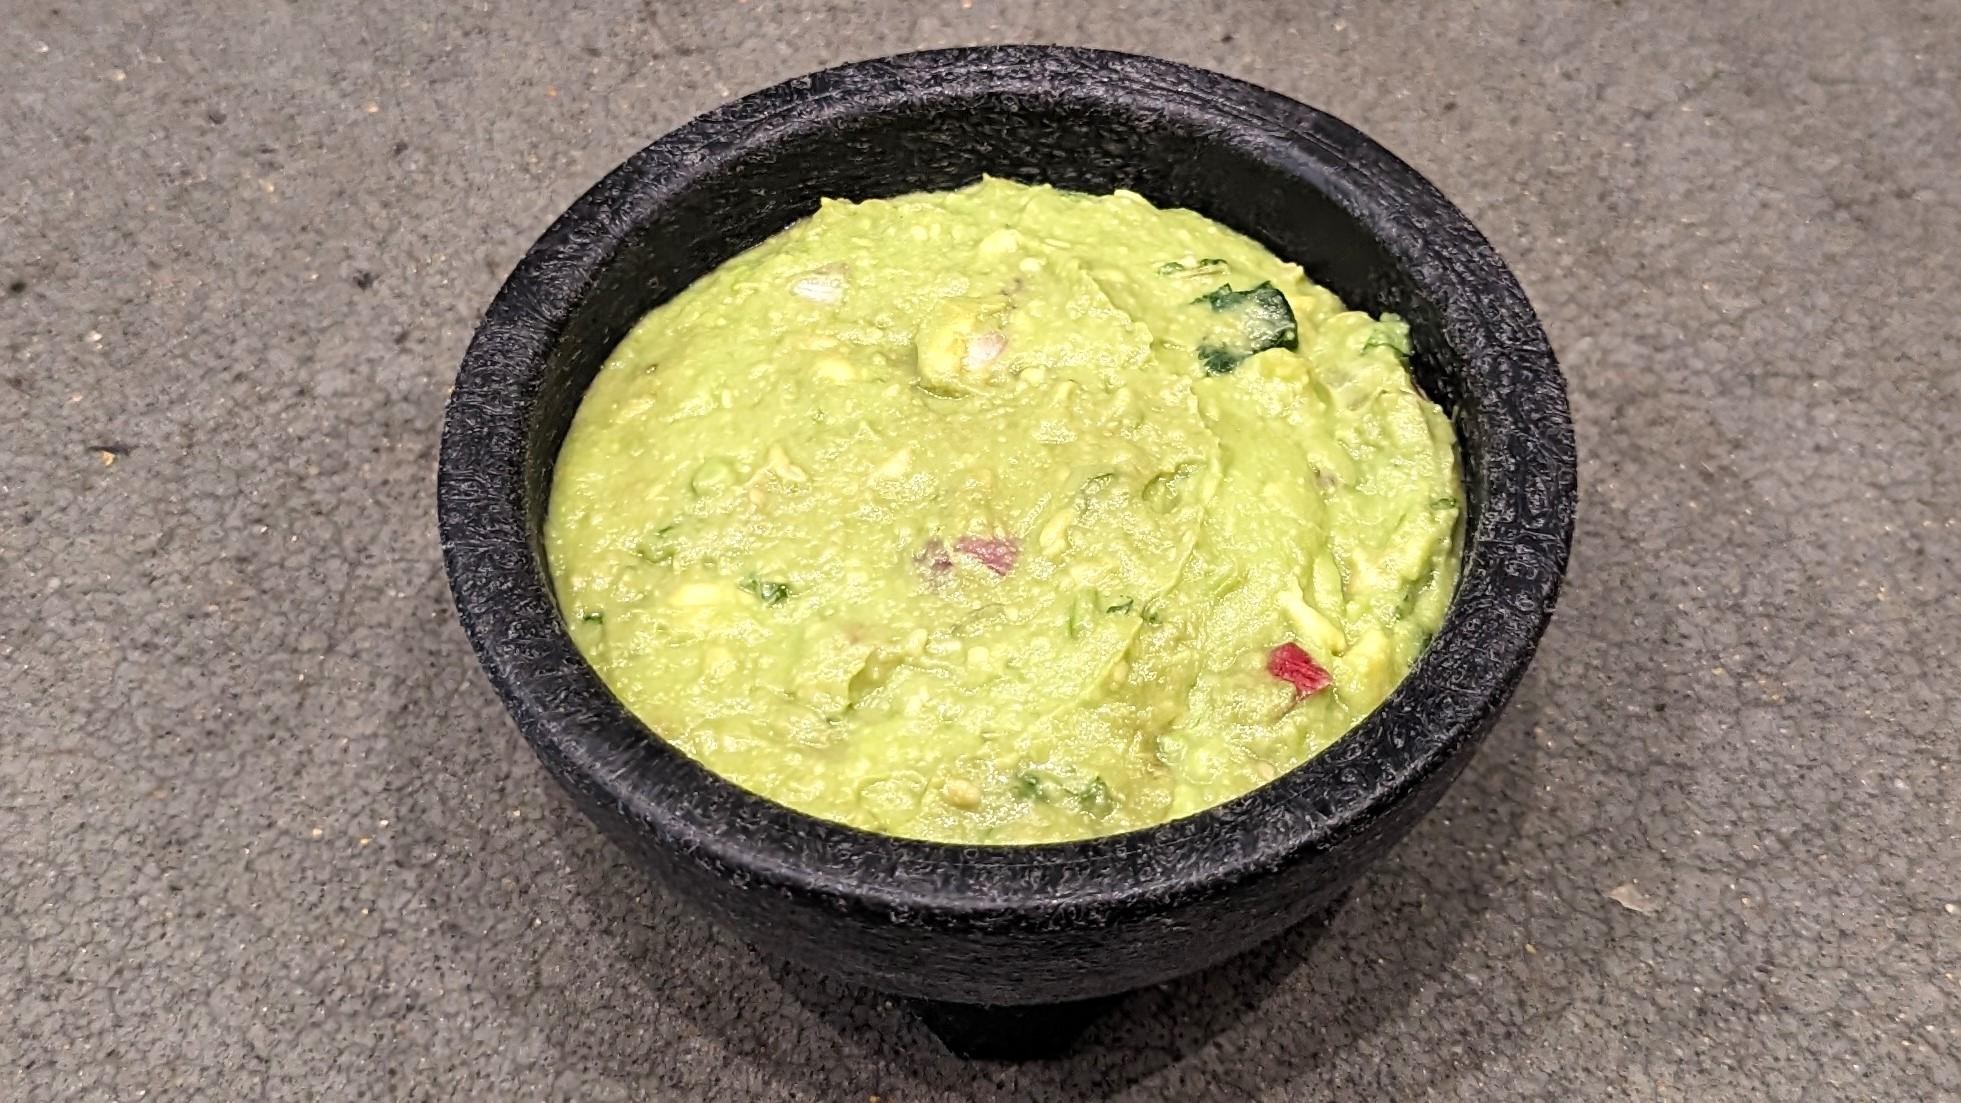 LG - Guacamole Only